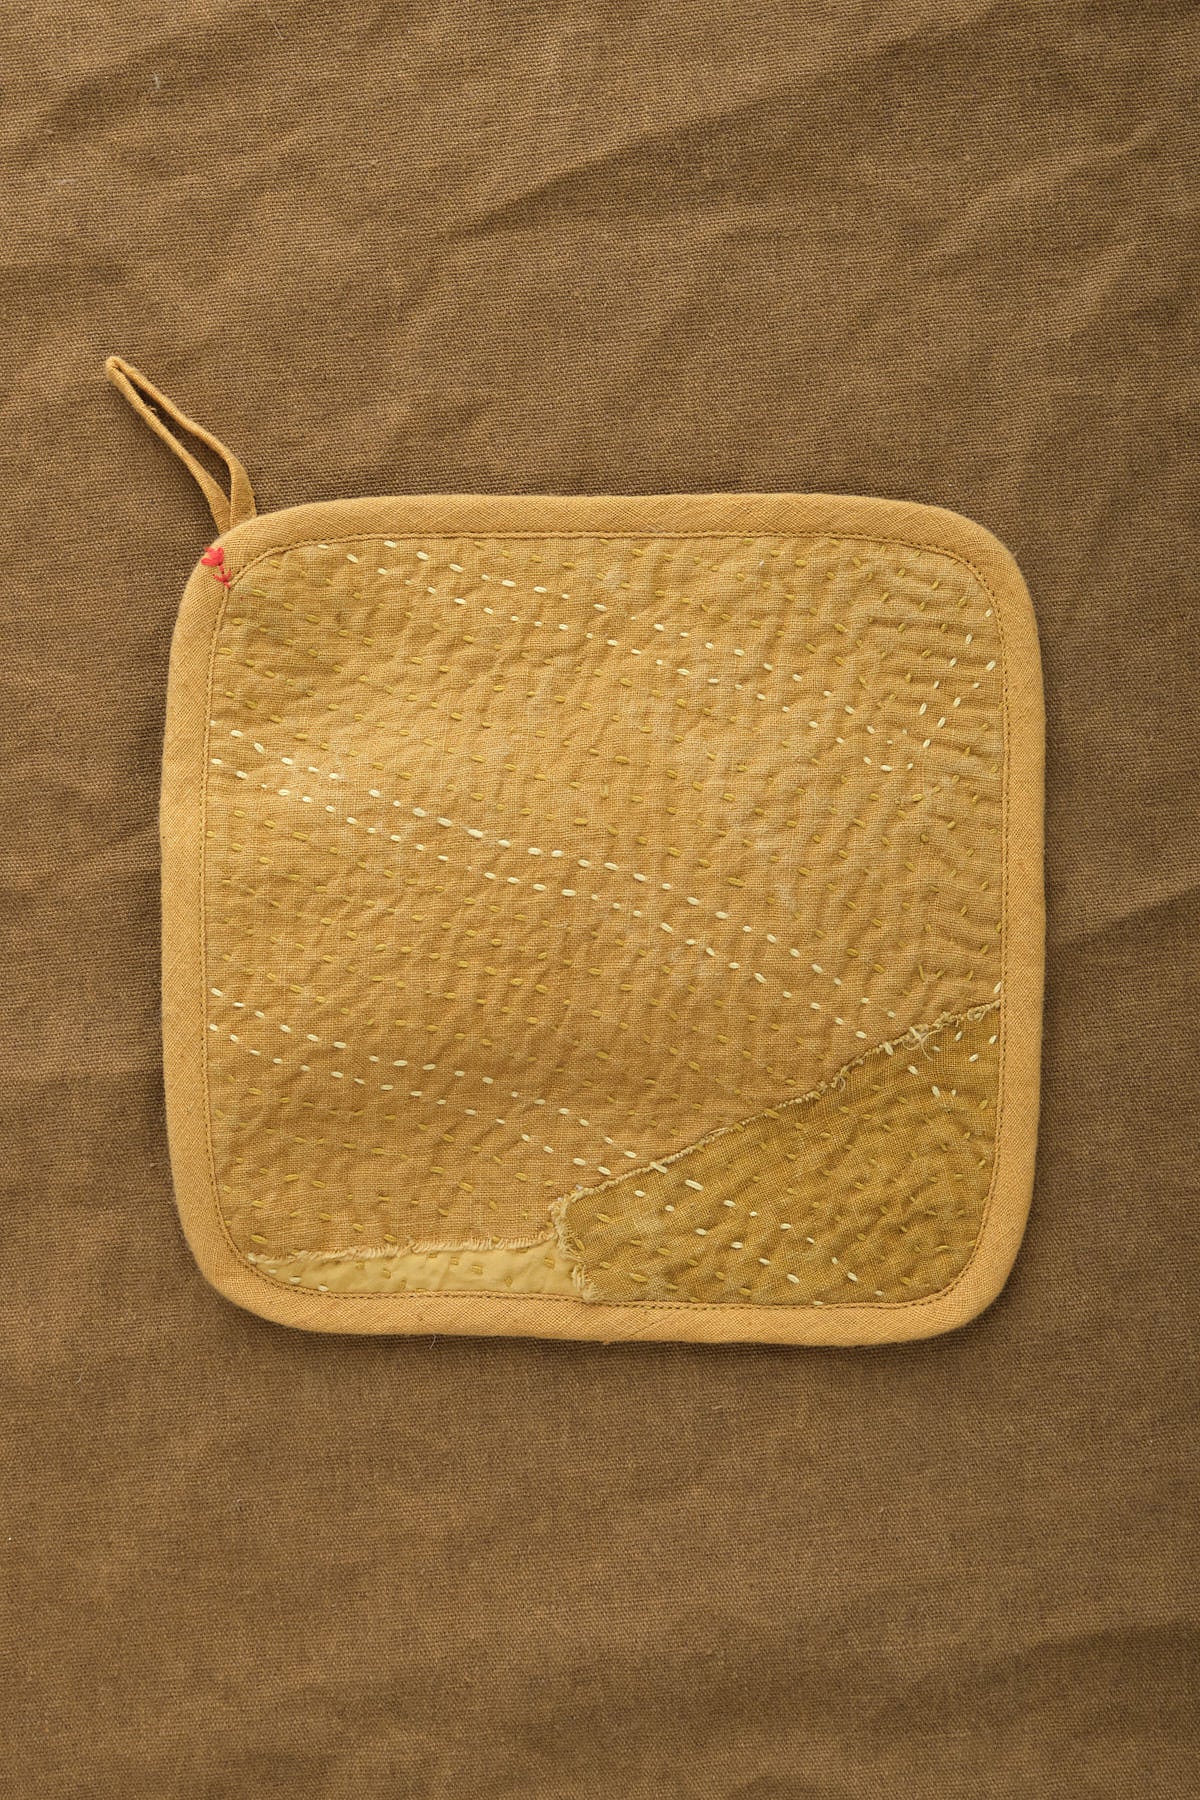 Eleven Eleven Hand-quilted Pot Holder in Ochre Yellow